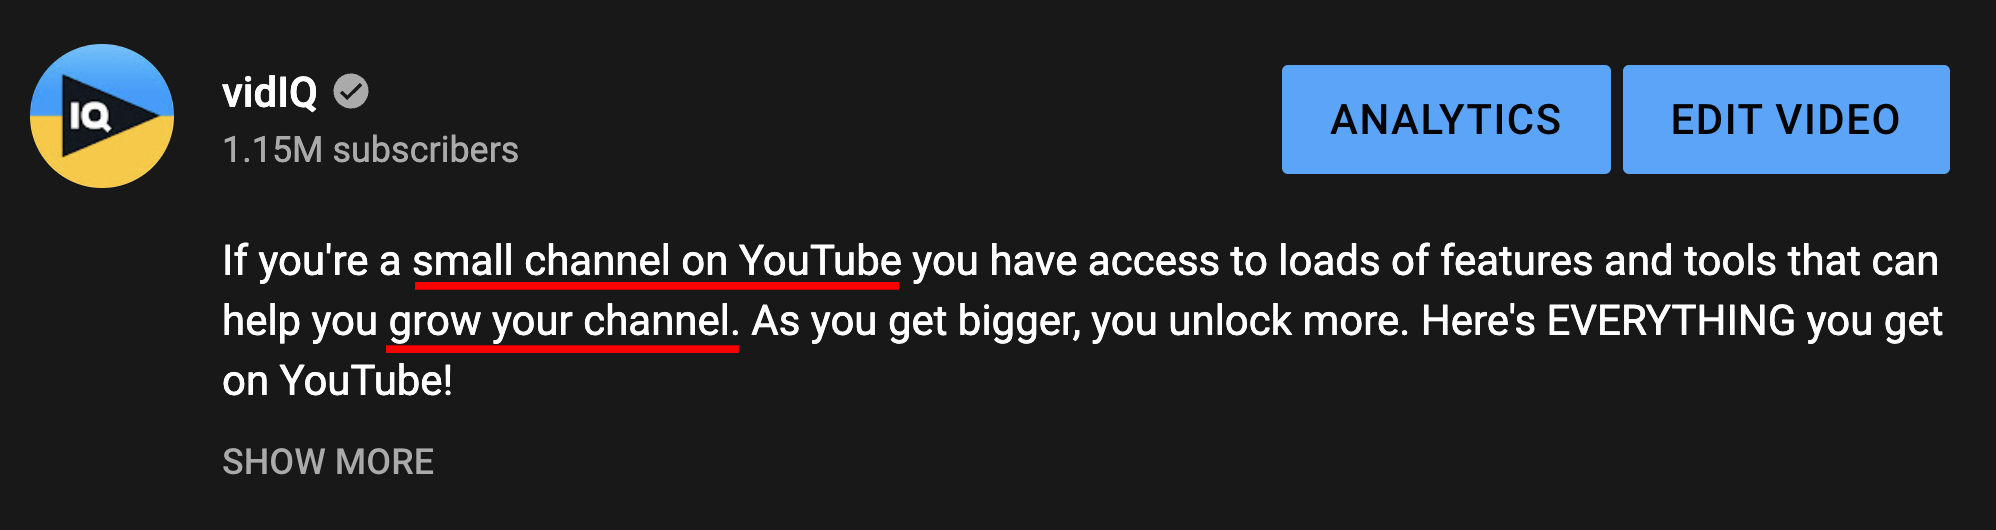 A YouTube video description with two keywords underlined: "Small channel on YouTube" and "grow your channel."